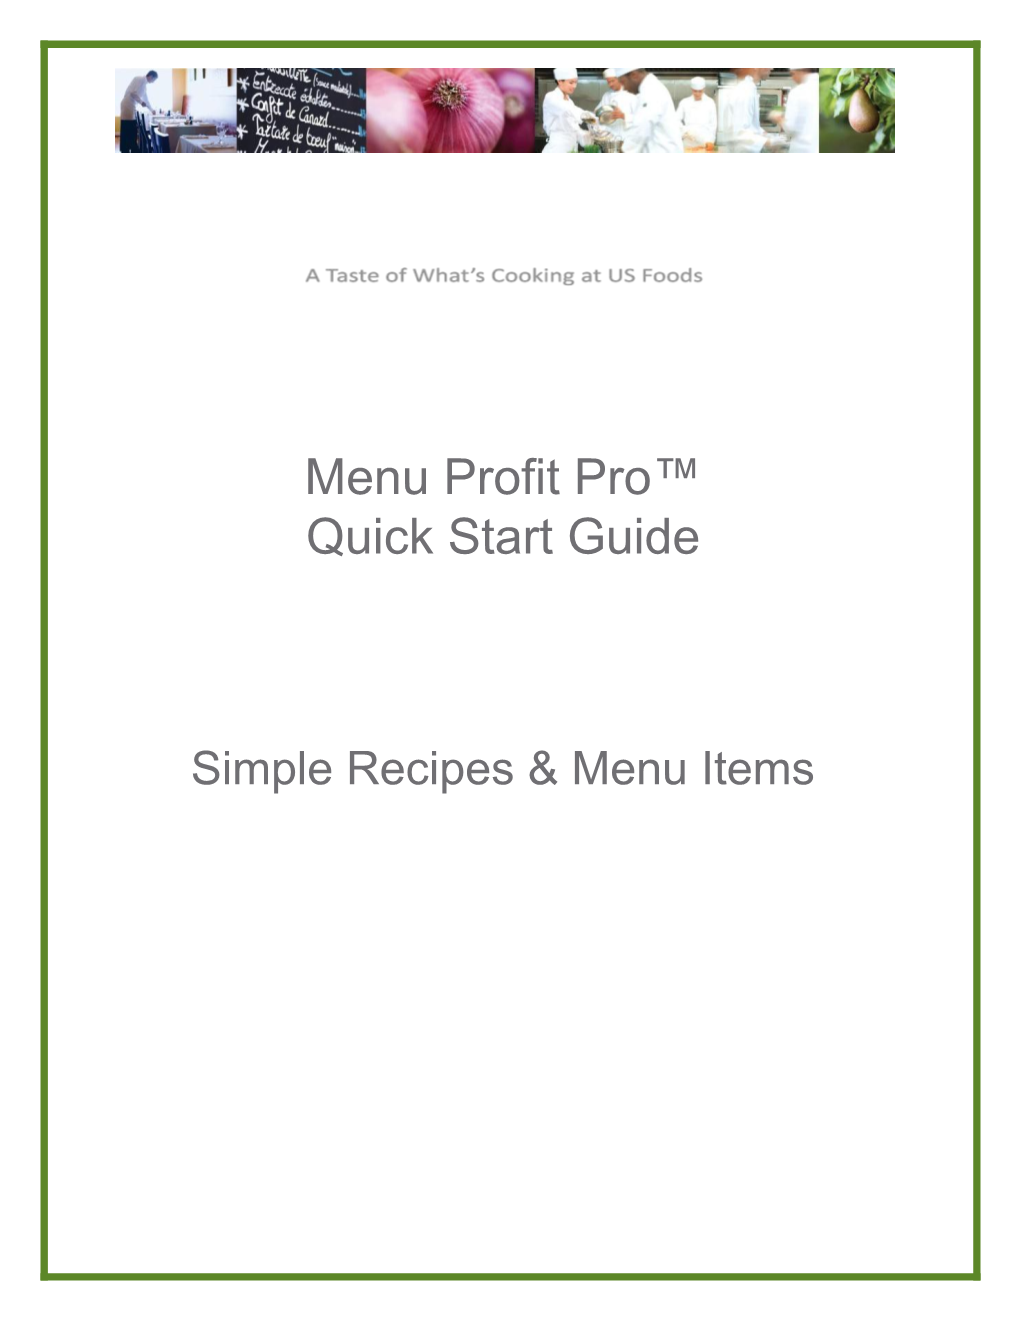 Step 1 Identify the Most Important Recipes and Menuitems